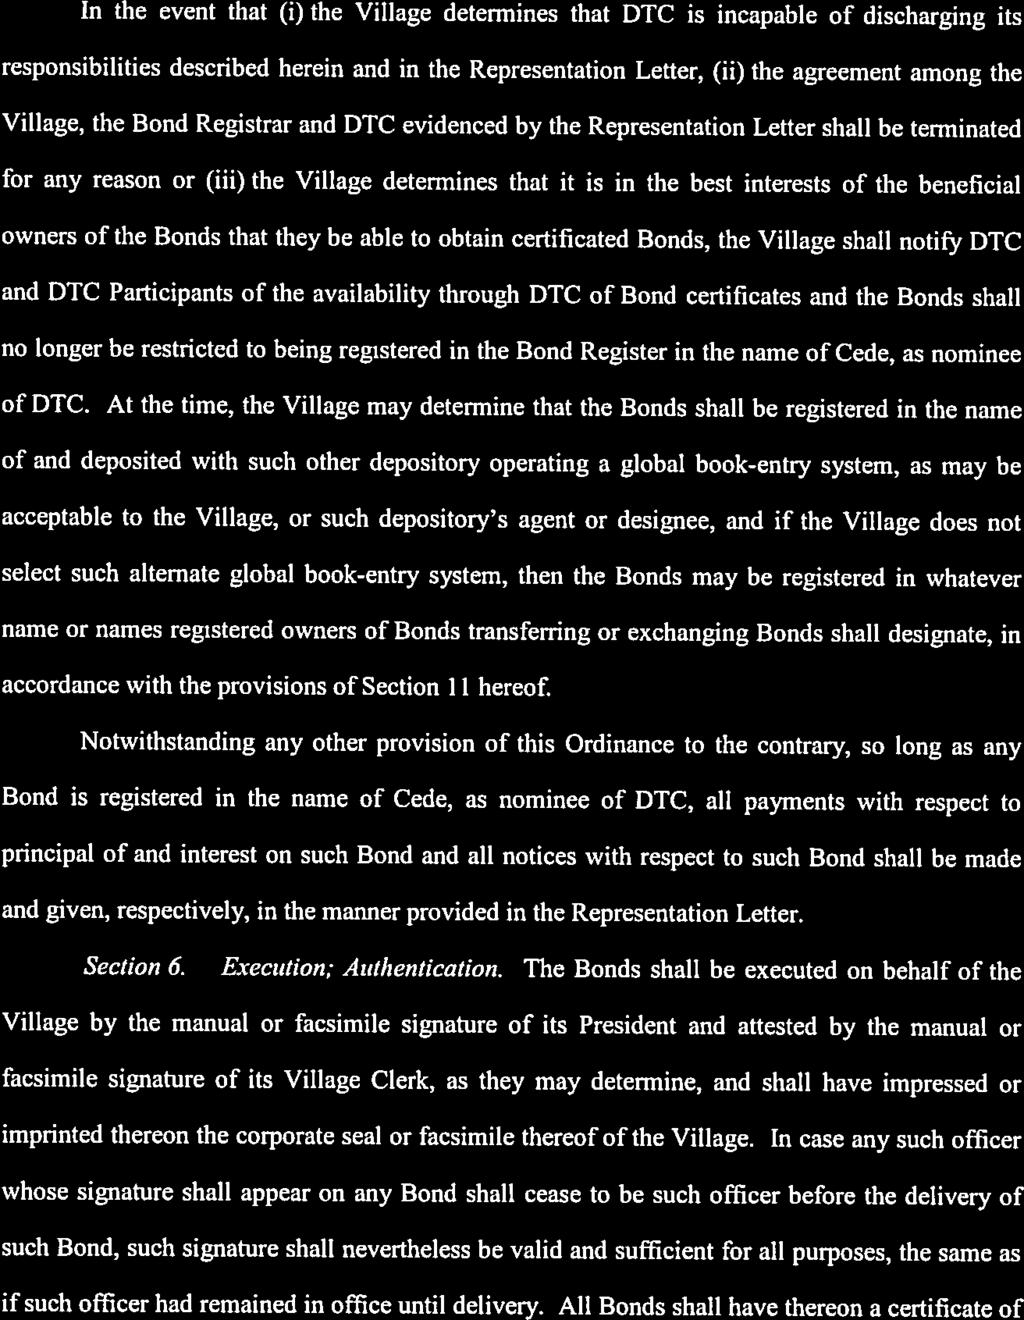 In the event that (i) the Village determines that DTC is incapable of discharging its responsibilities described herein and in the Representation Letter, (ii) the agreement among the Village, the